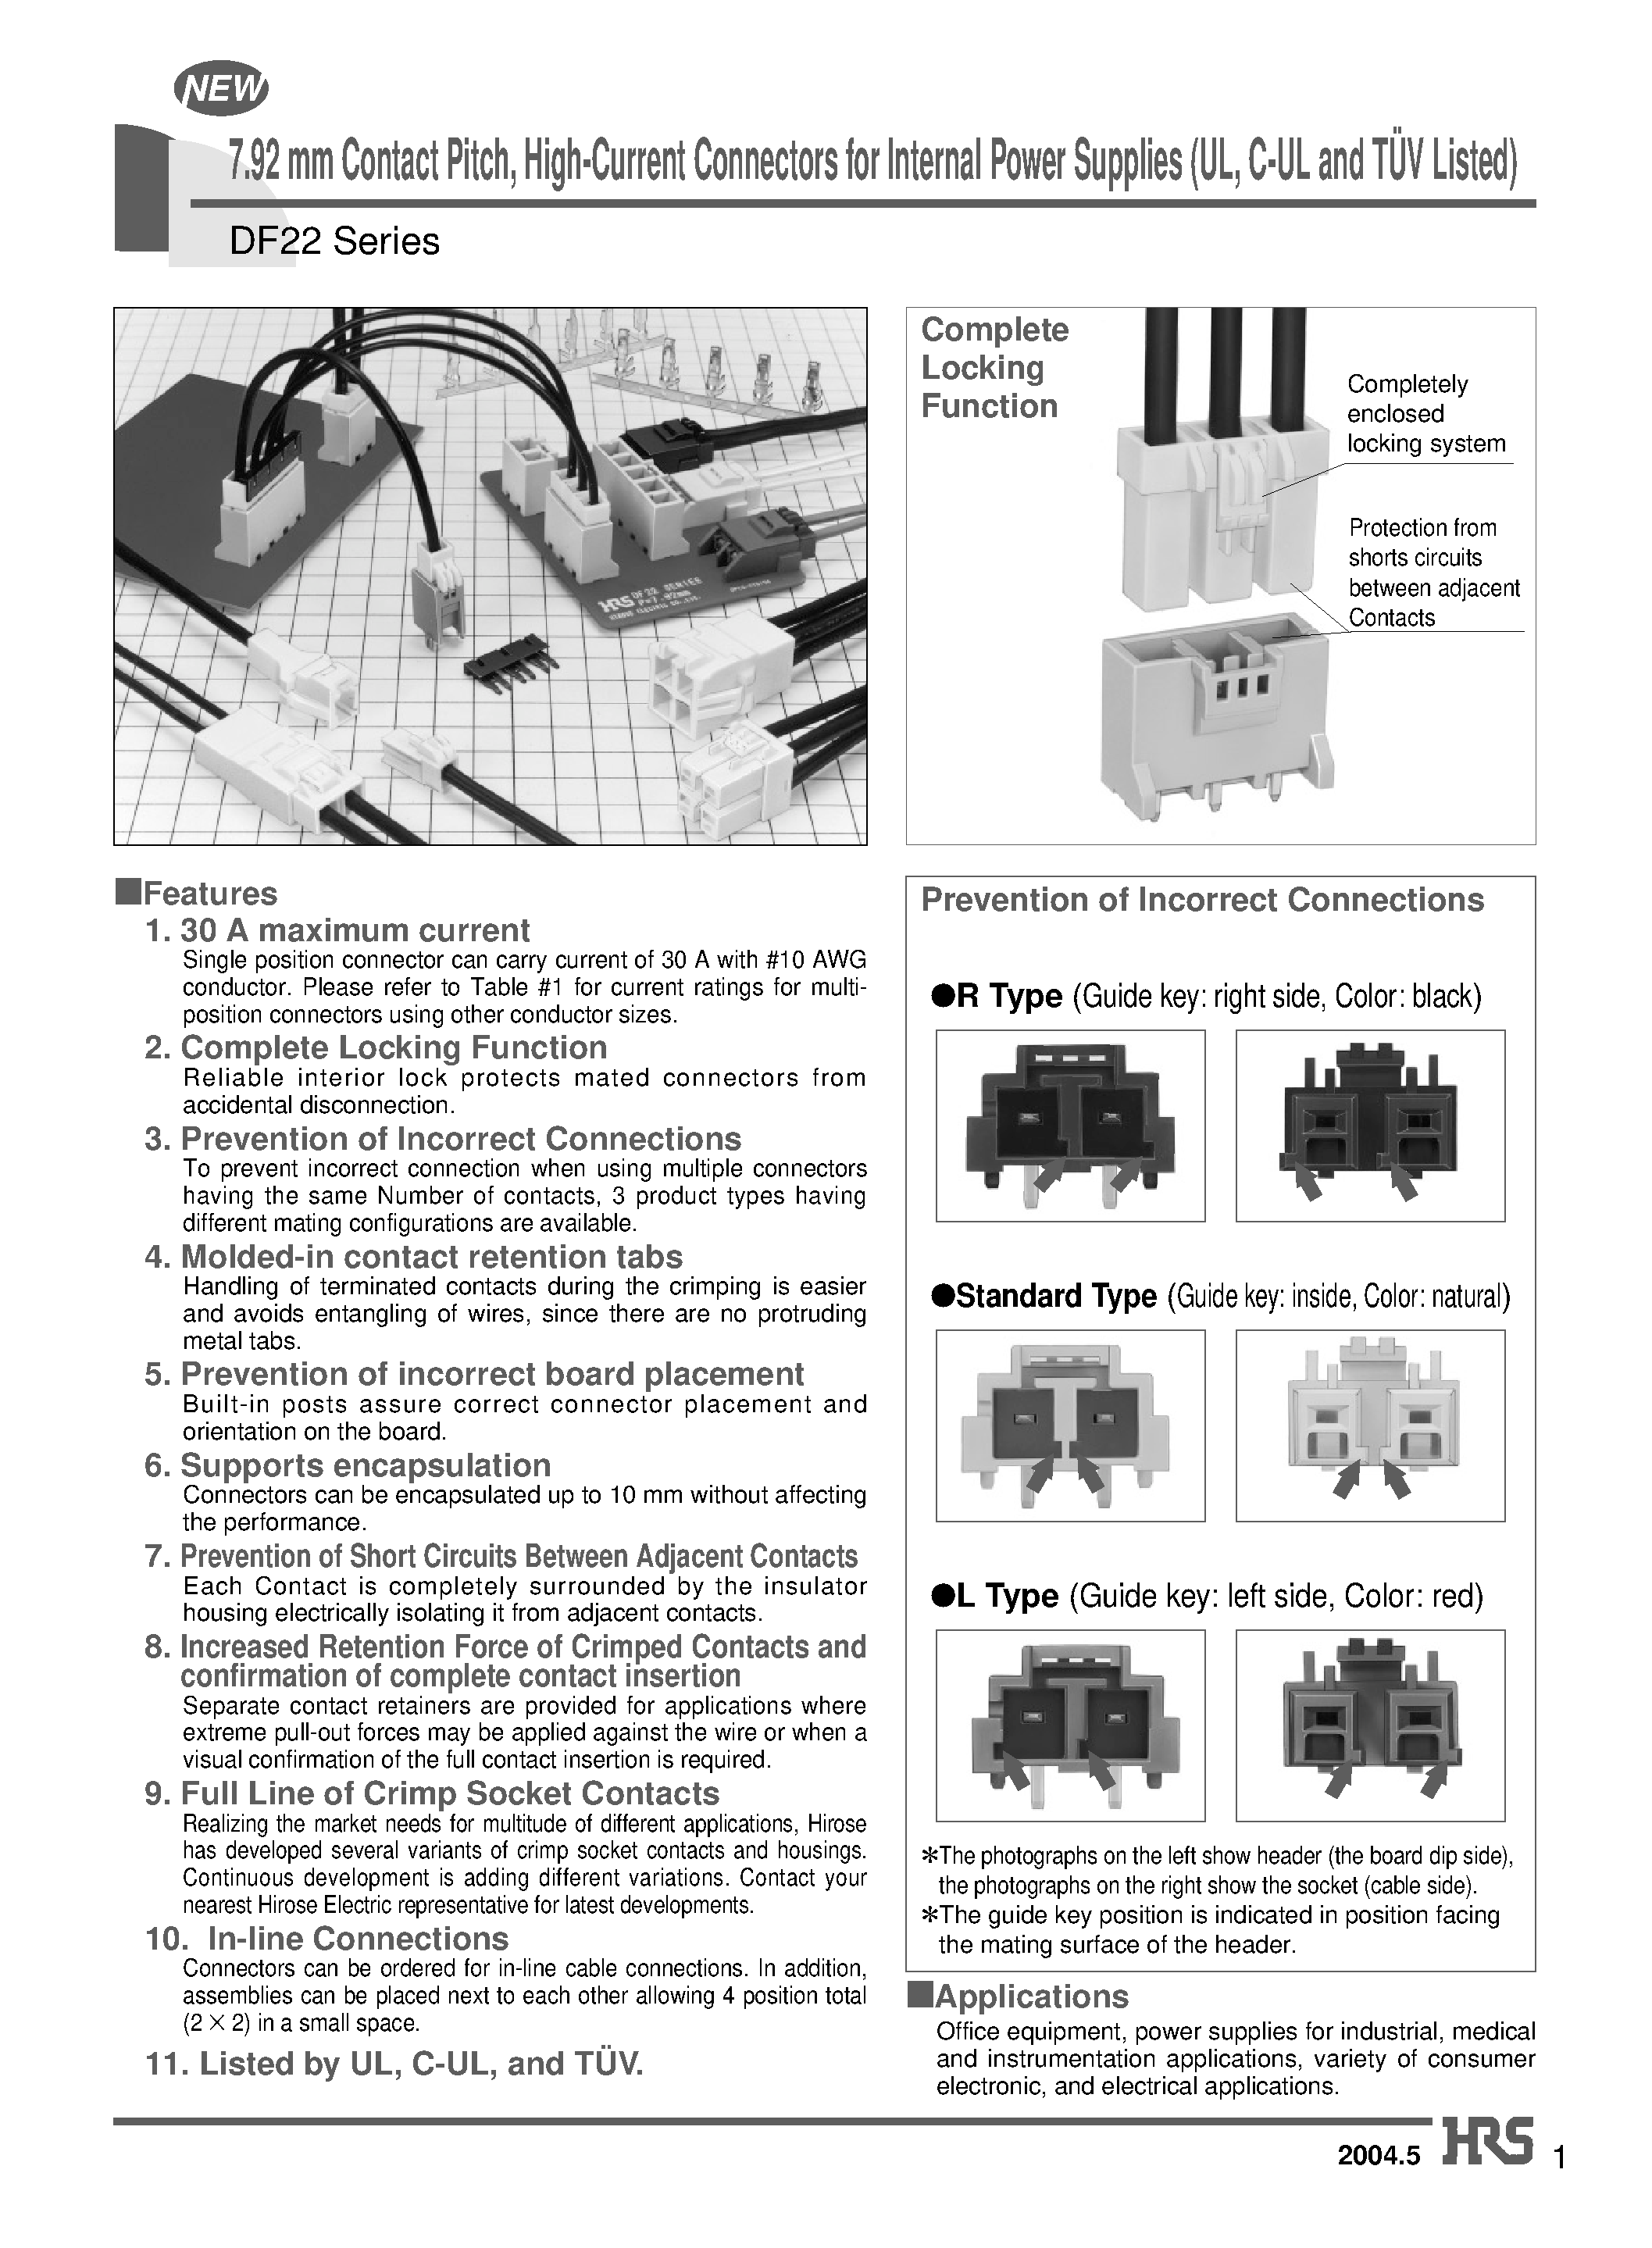 Даташит DF22A-1EP-7.92C - 7.92 mm Contact Pitch/ High-Current Connectors for Internal Power Supplies (UL/ C-UL and TUV Listed) страница 1